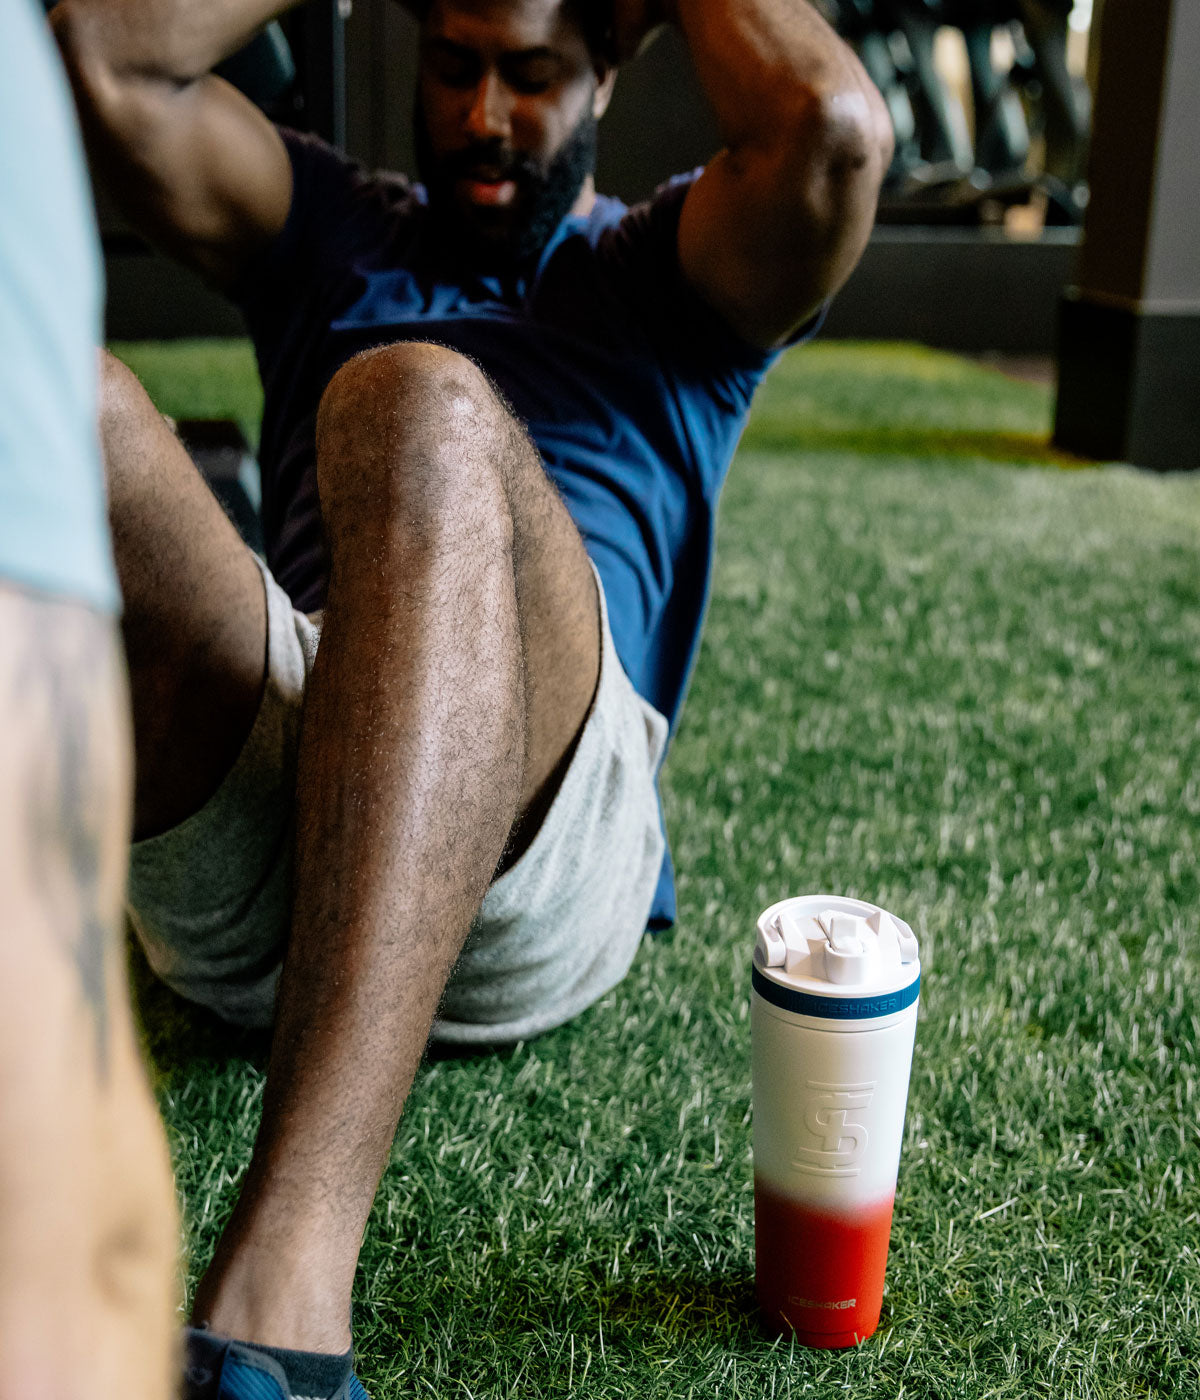 An image of a USA-colored 26oz Sport Bottle sitting next to a man who is doing sit-ups on green turf.